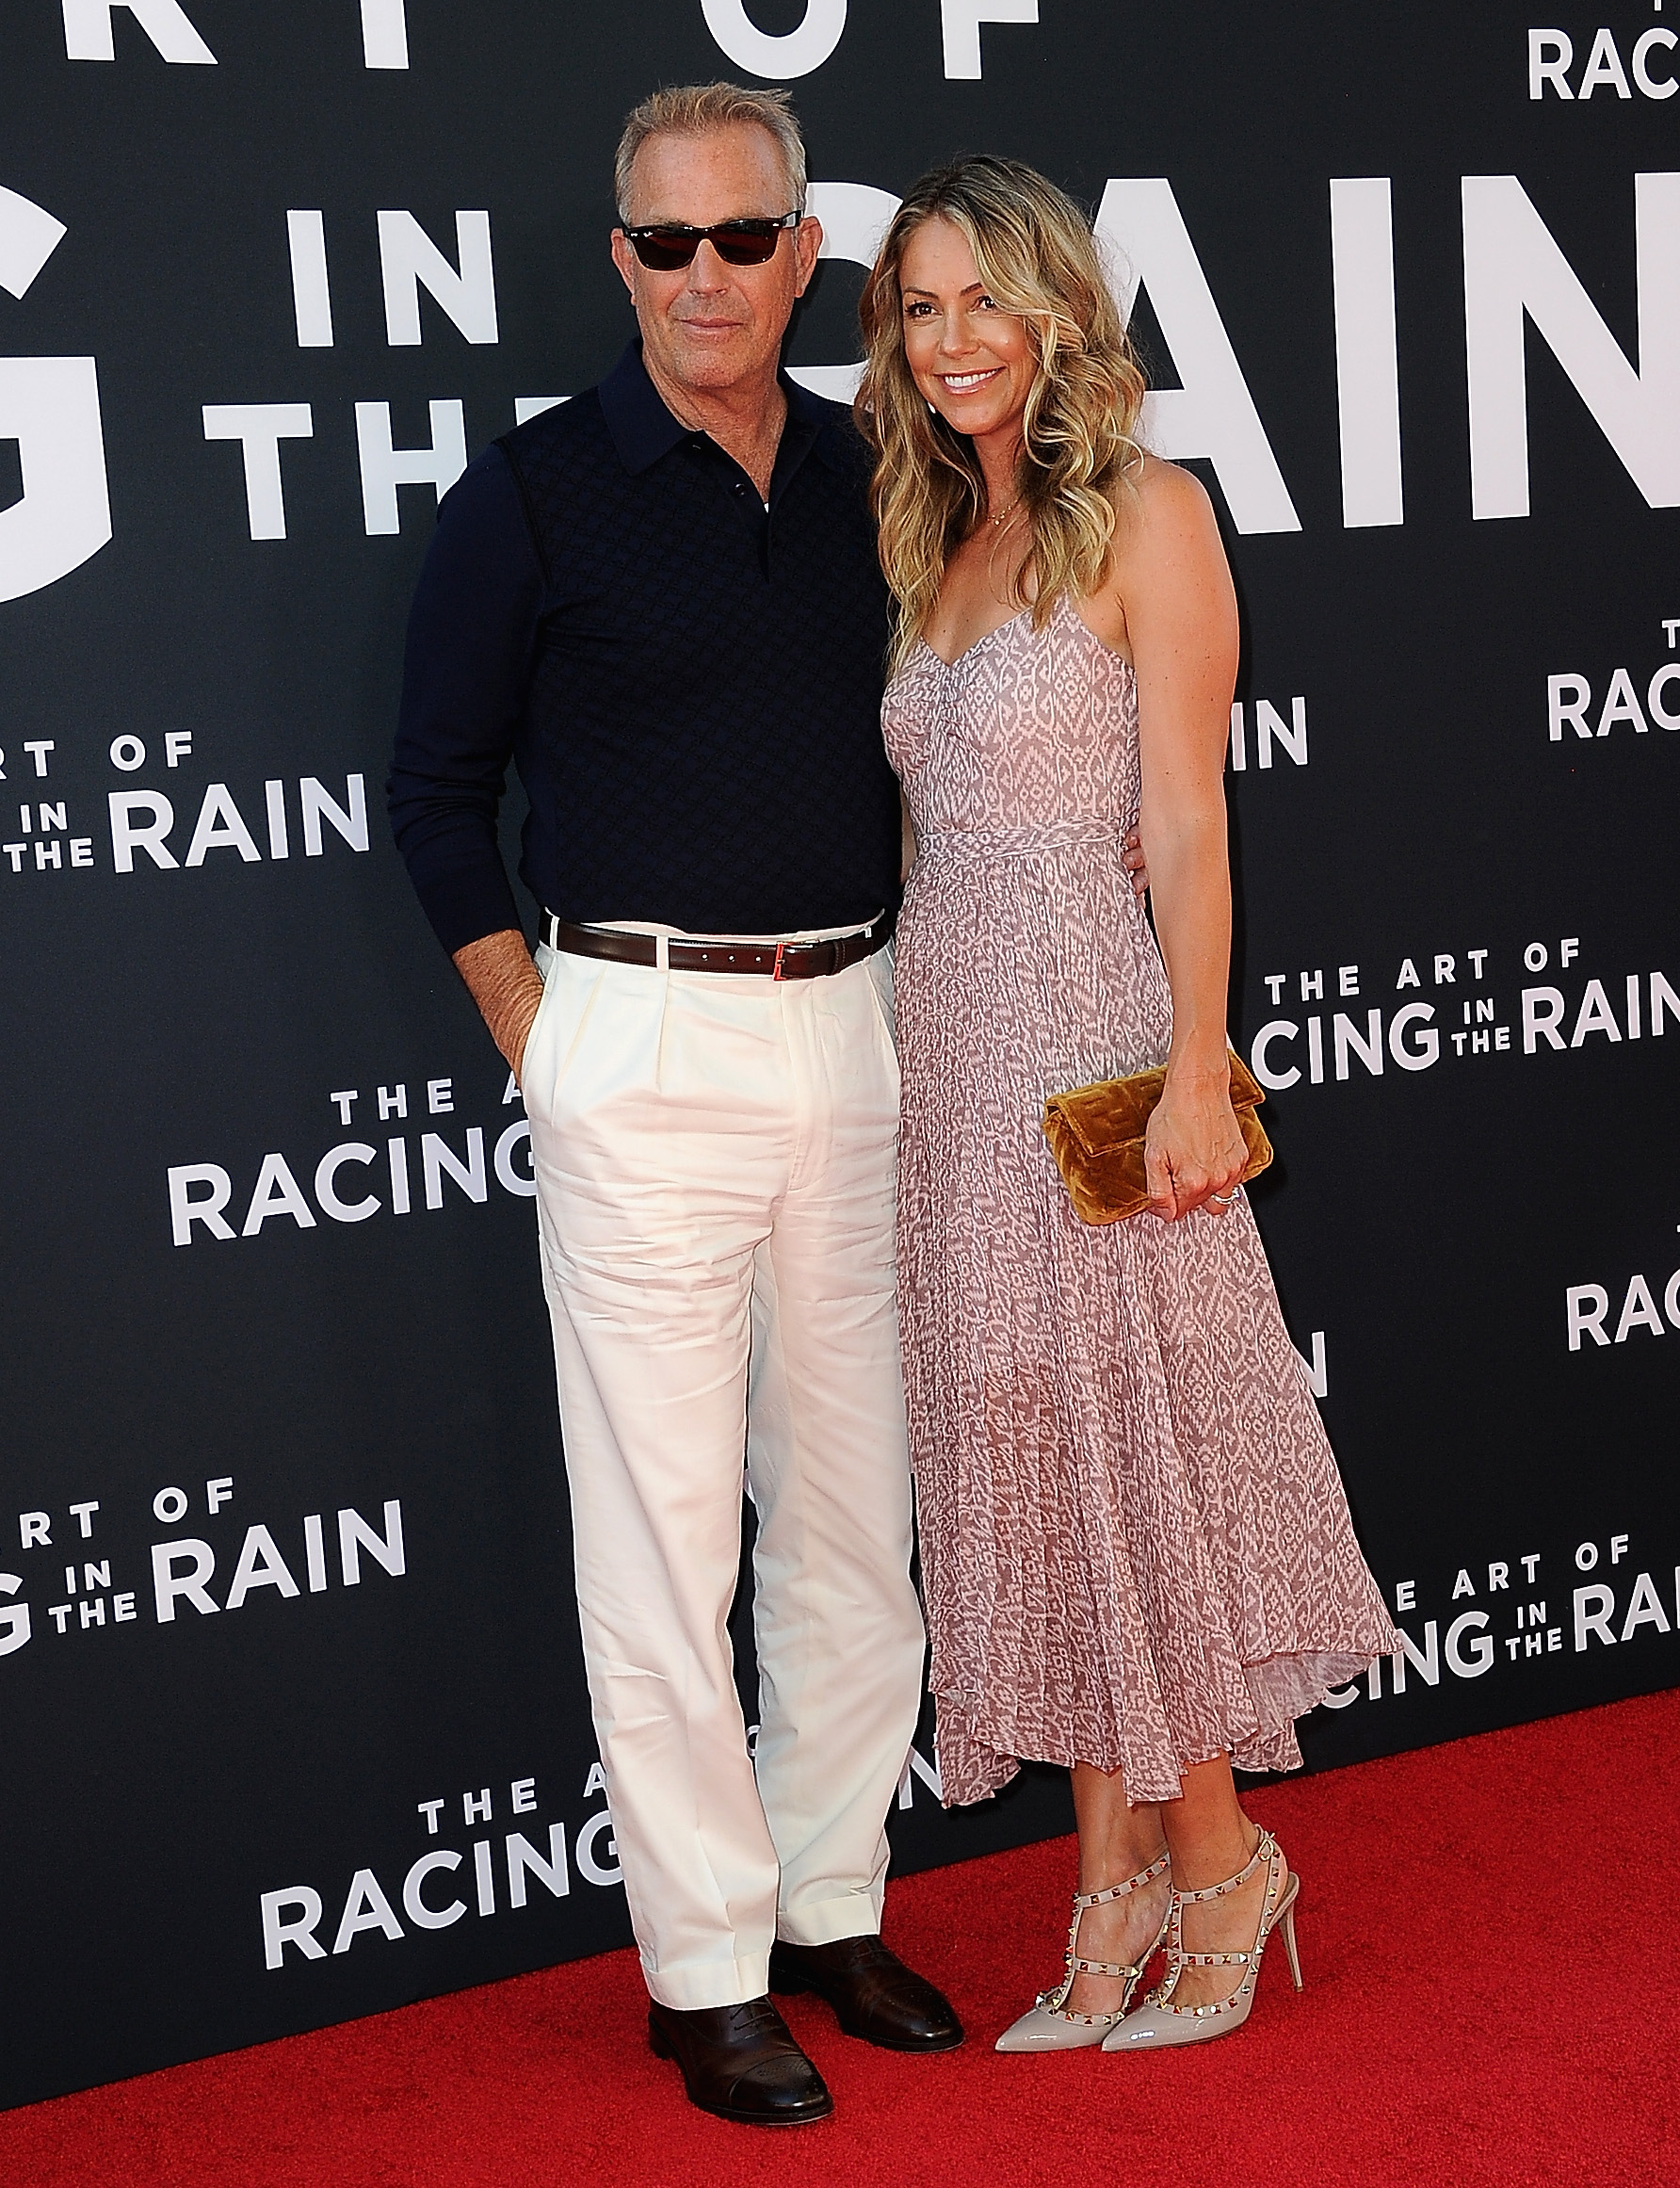 Kevin Costner and Christine Baumgartner at the premiere of "The Art Of Racing In The Rain" in Los Angeles, California on August 1, 2019. | Source: Getty Images